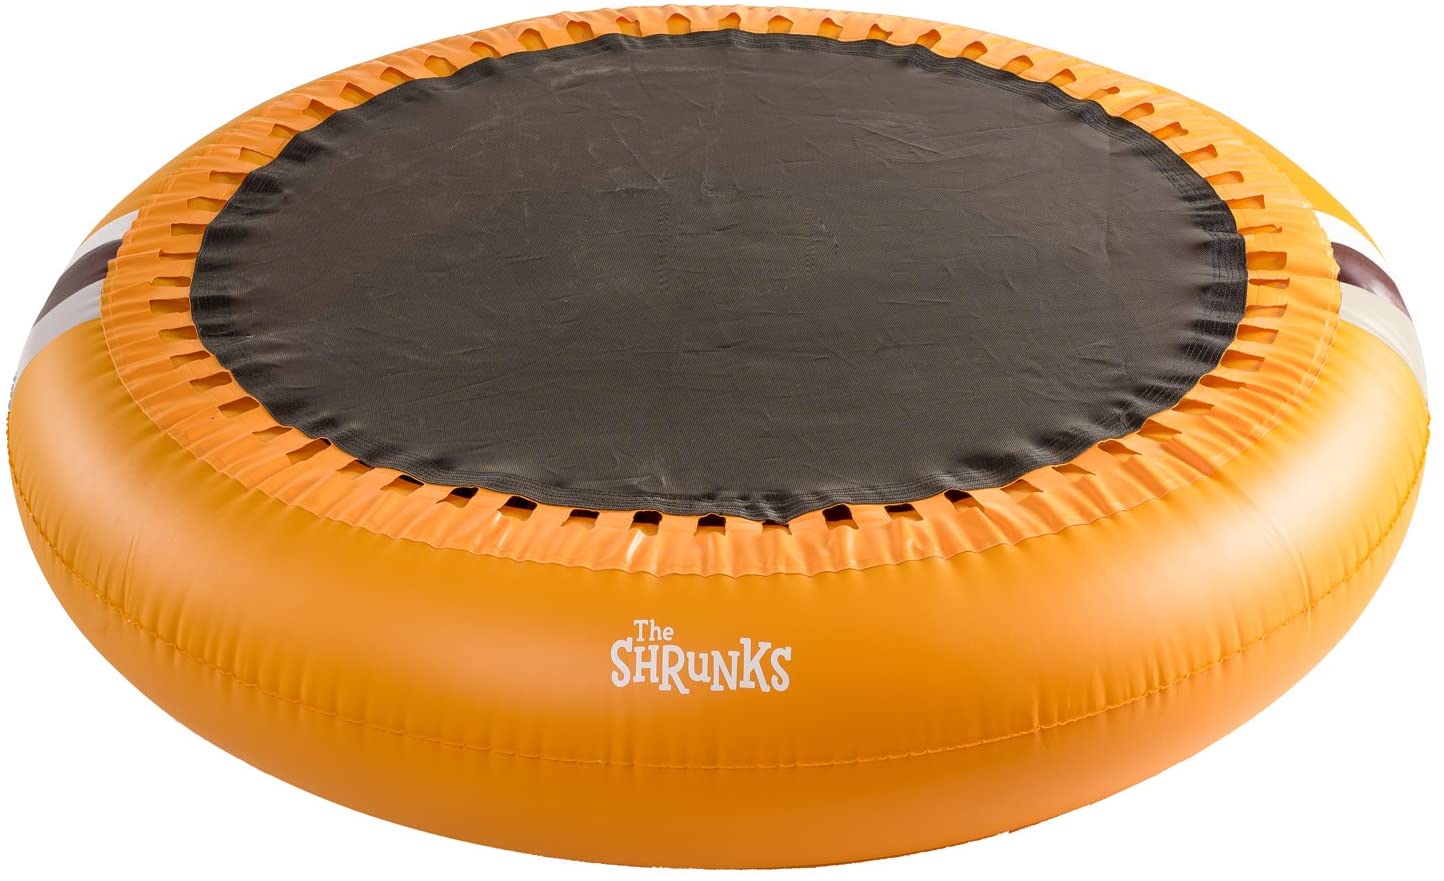 The Shrunks Inflatable 2-in-1 Safety Trampoline Pool Portable Indoor or Outdoor Use, Orange, 72 X 72-Inch